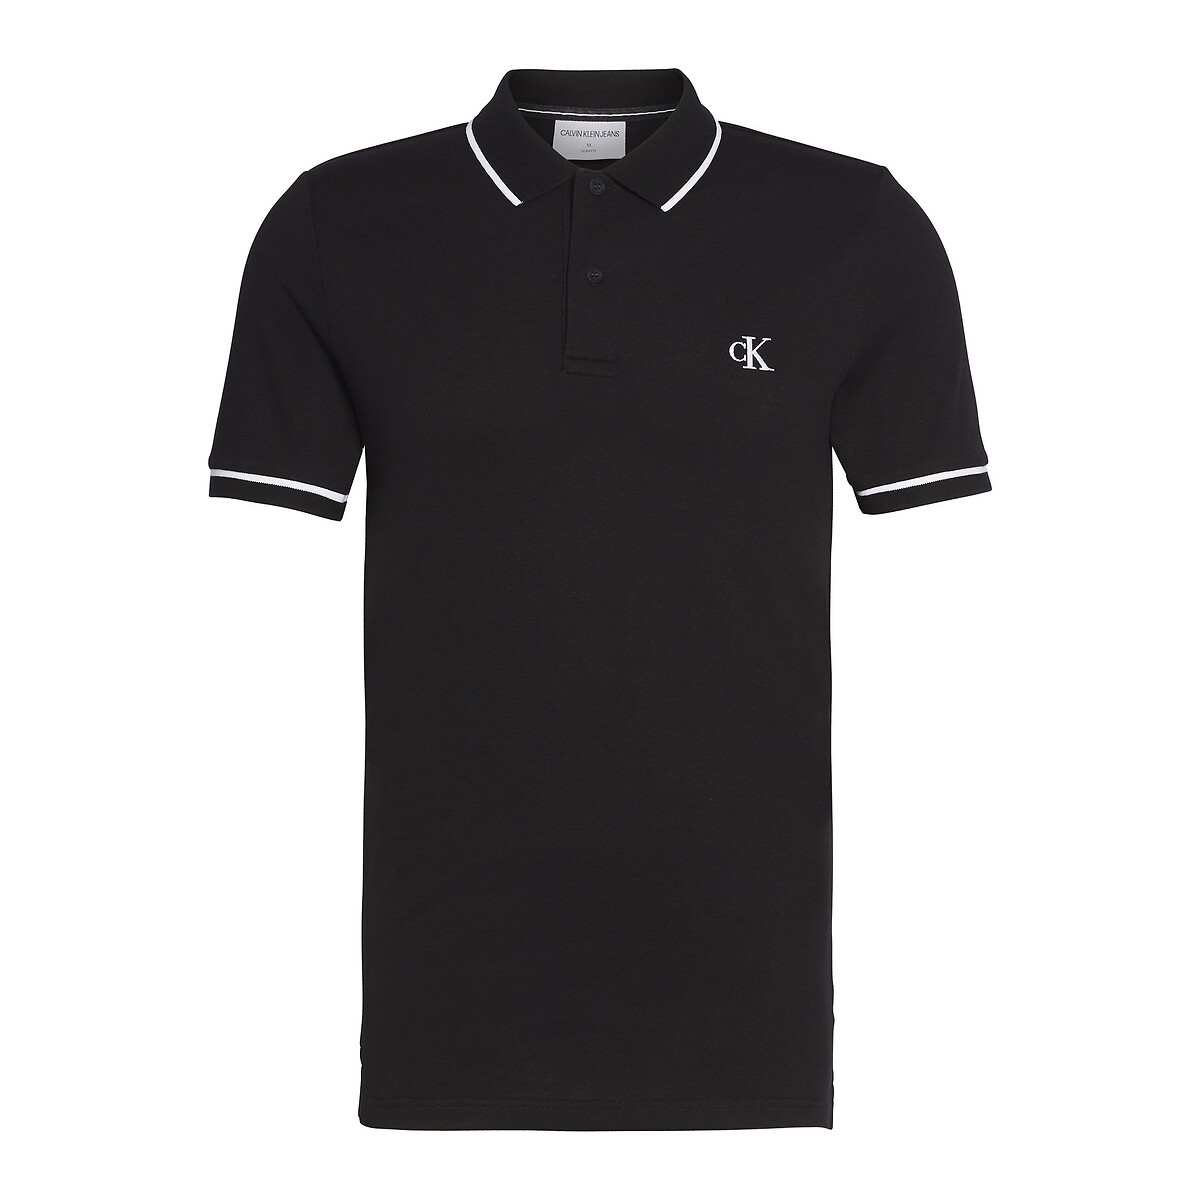 Tipping Slim Polo Shirt in Cotton Pique Mix